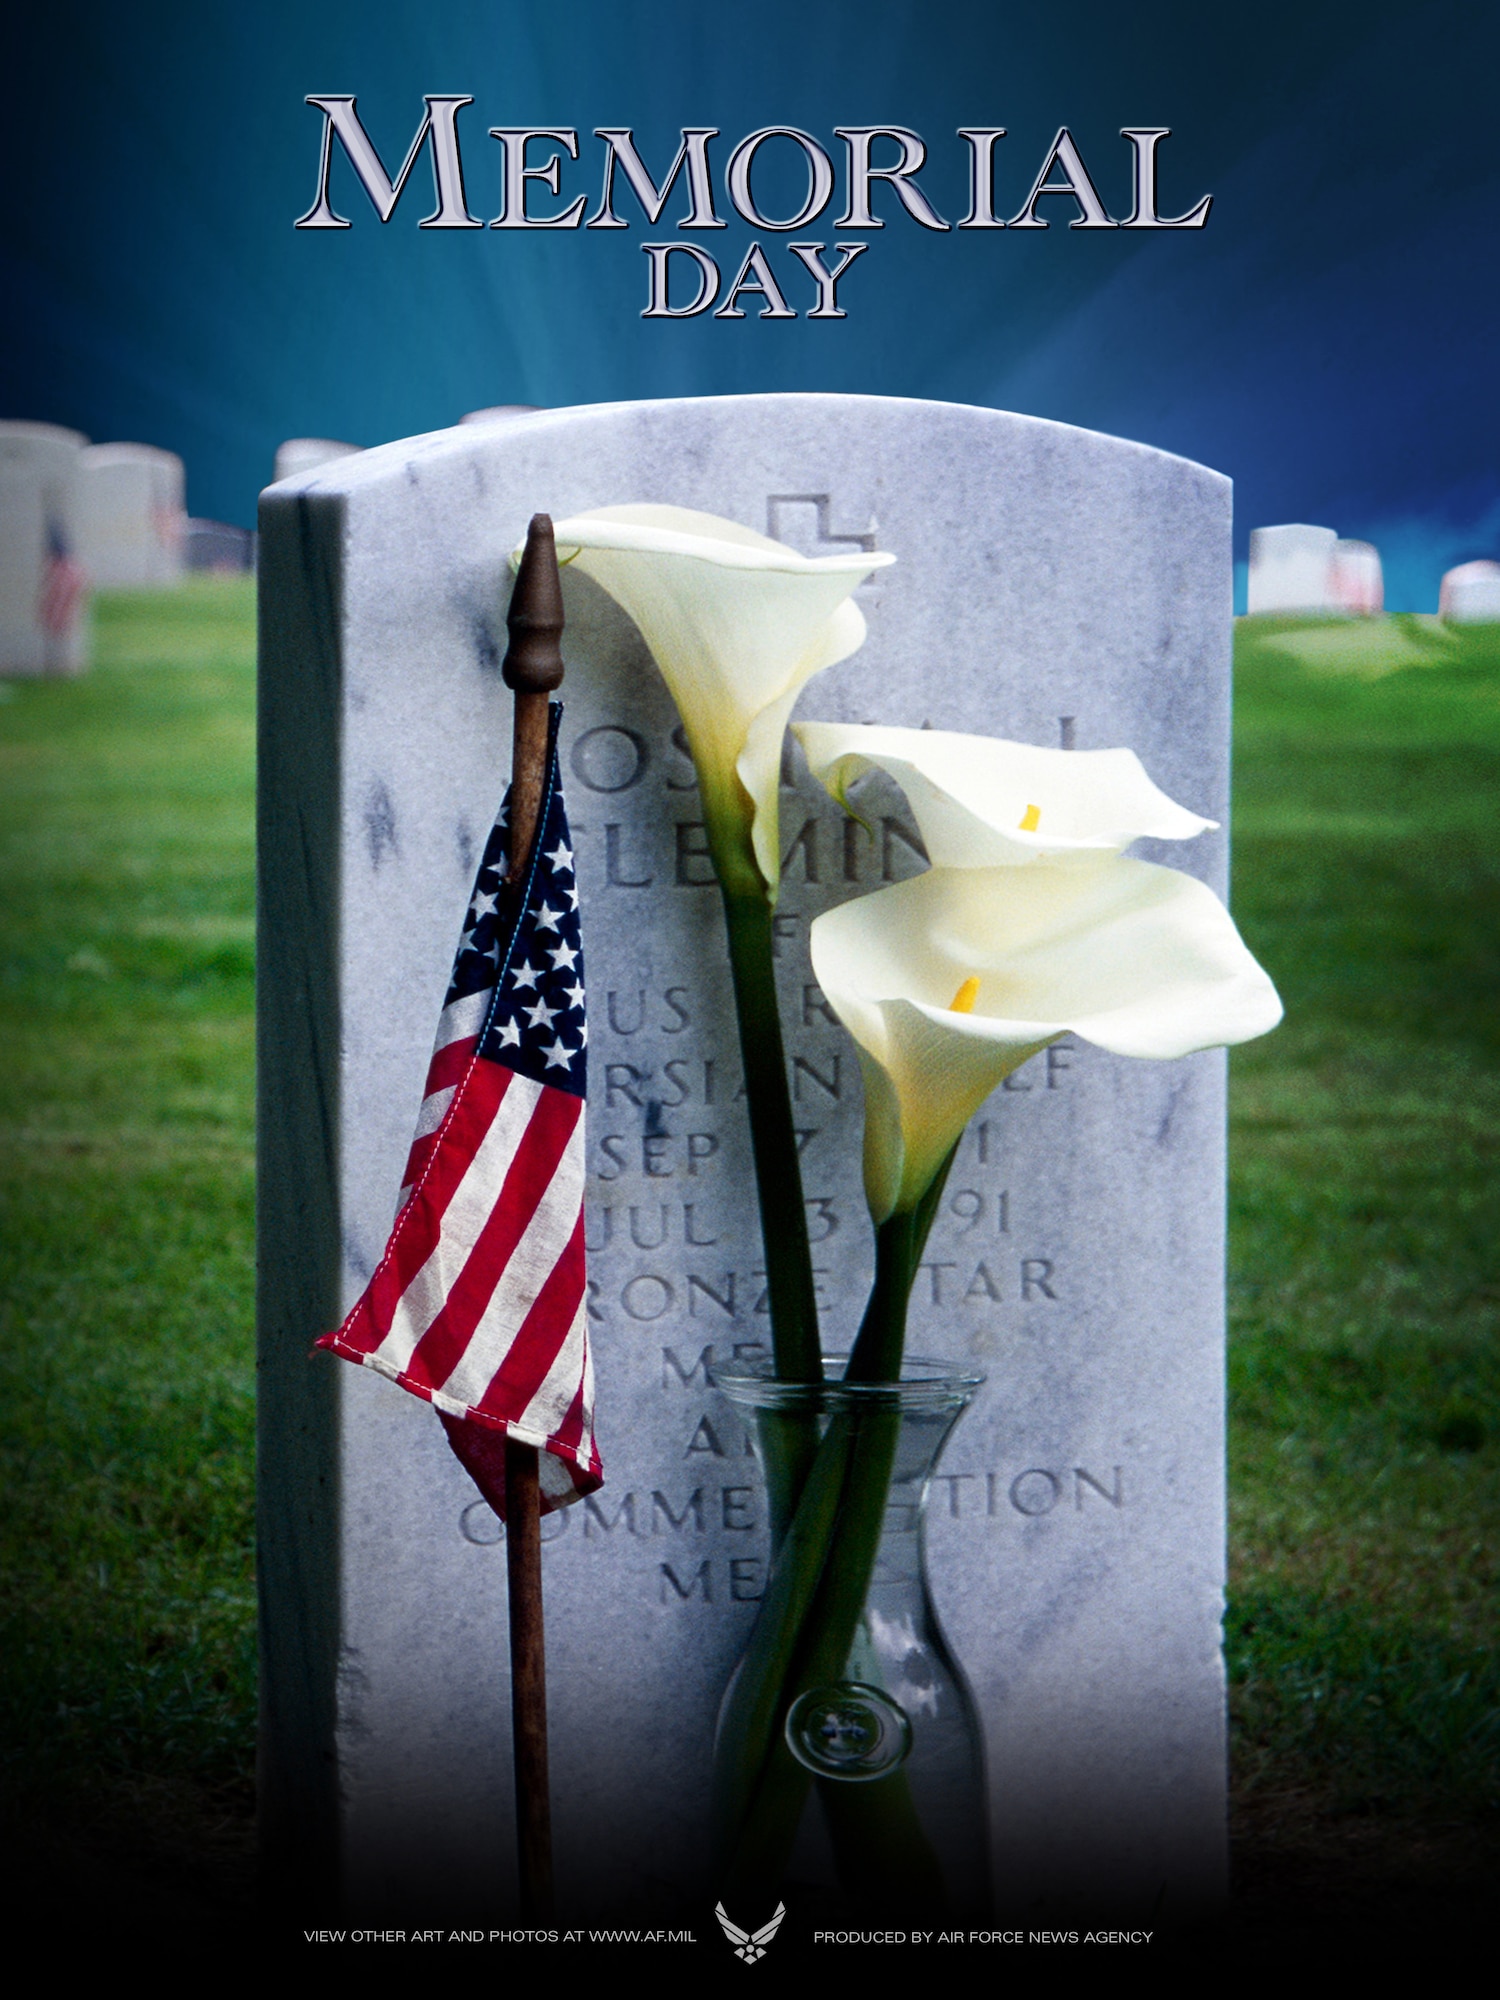 2008 Memorial Day Poster. (Poster created by Virginia Reyes; U.S. Air Force photo/Vance Janes)